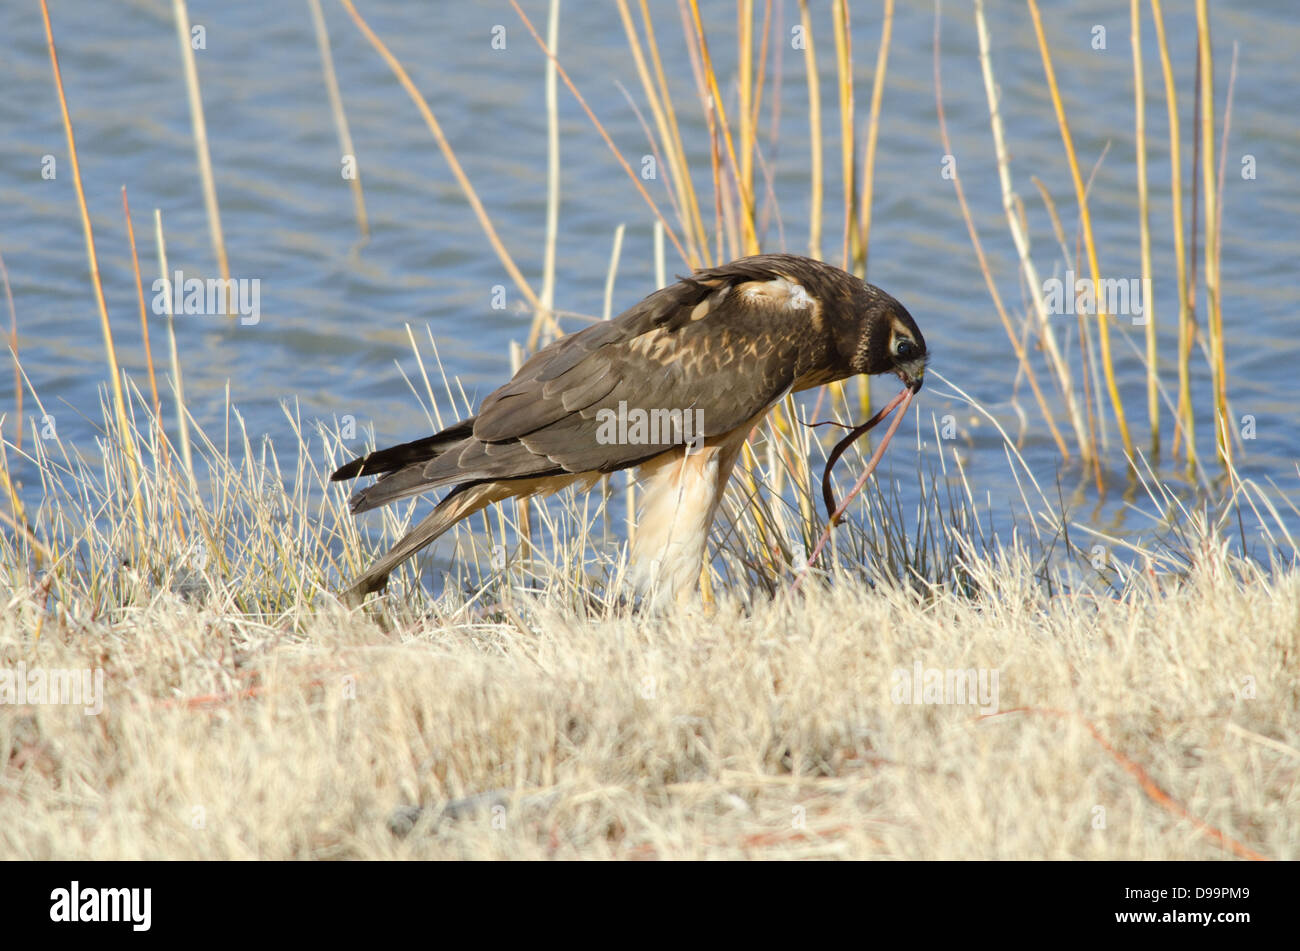 Female Northern Harrier, (Circus cyaneus), feeding at Bosque del Apache National Wildlife Refuge, Socorro co., New Mexico, USA. Stock Photo